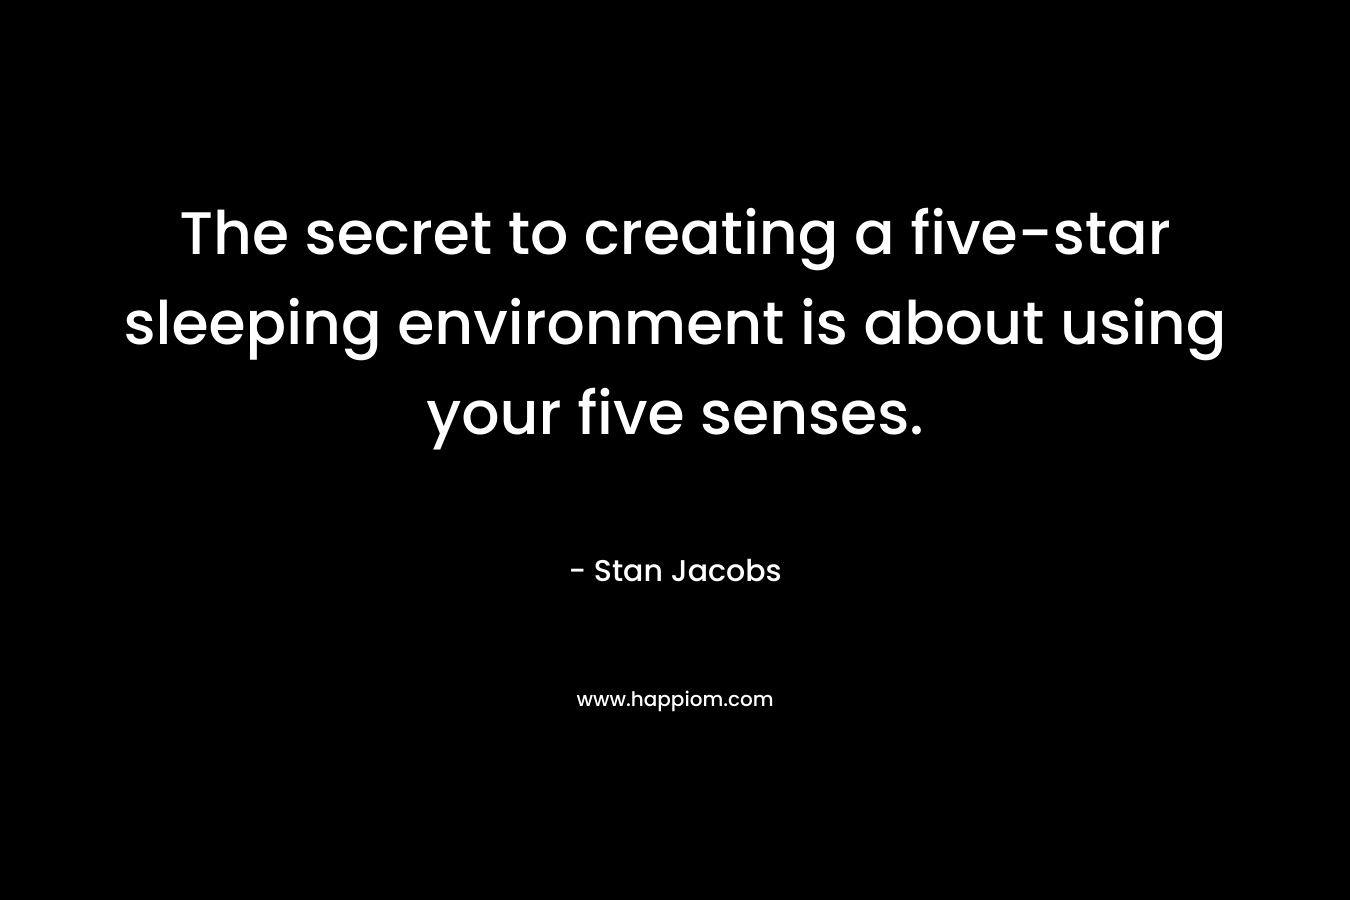 The secret to creating a five-star sleeping environment is about using your five senses. – Stan Jacobs